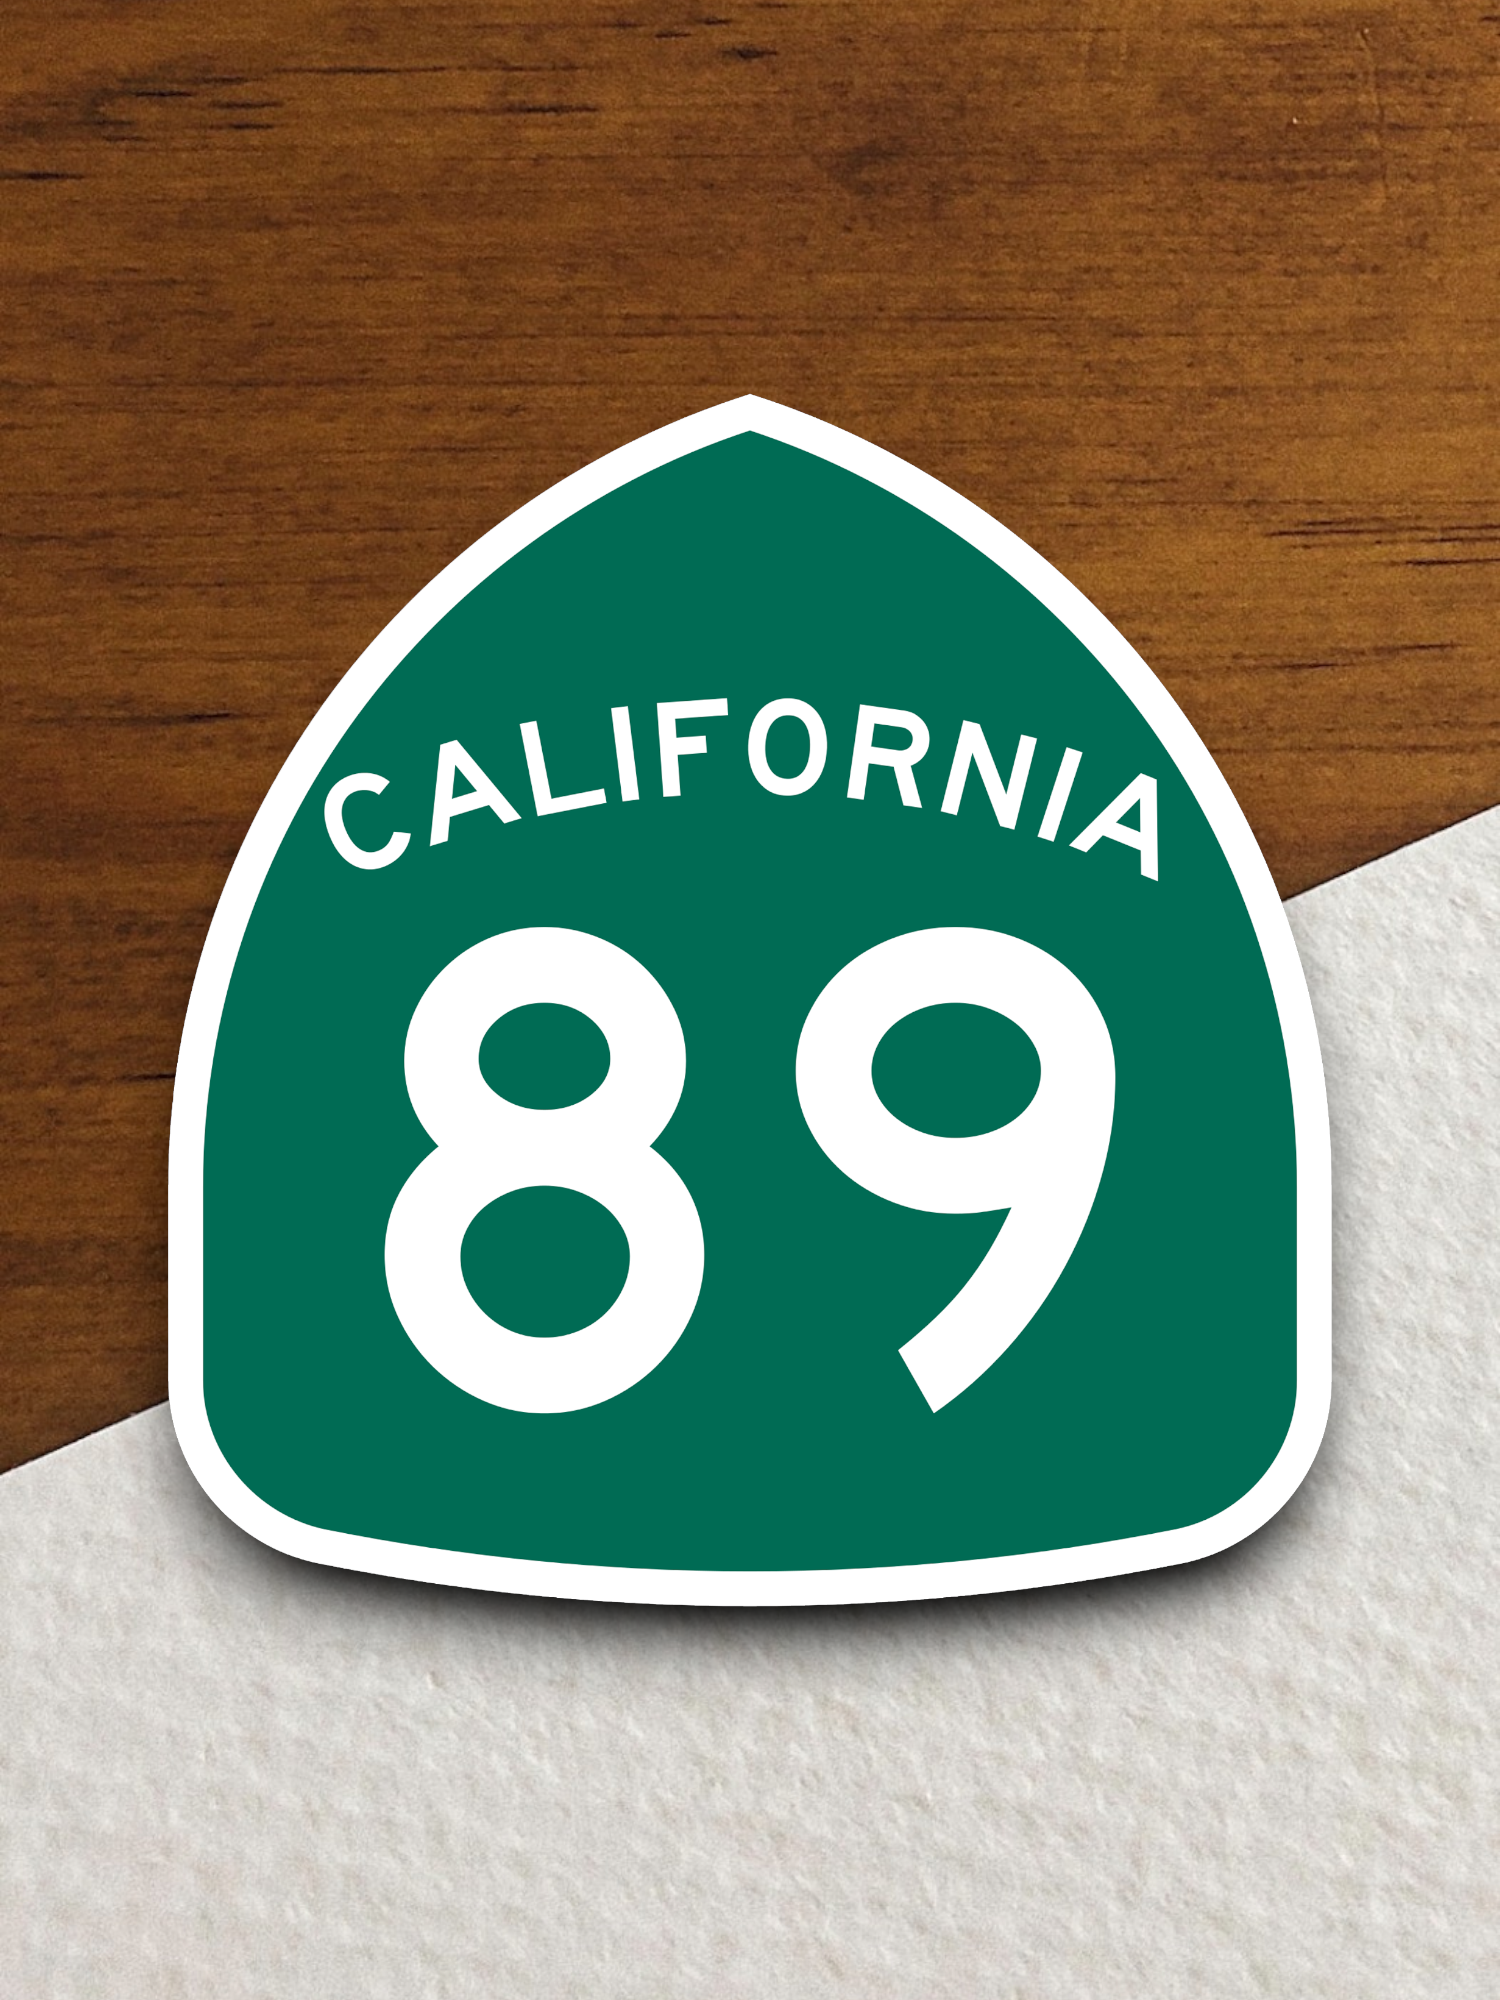 California State Route 89 Road Sign Sticker